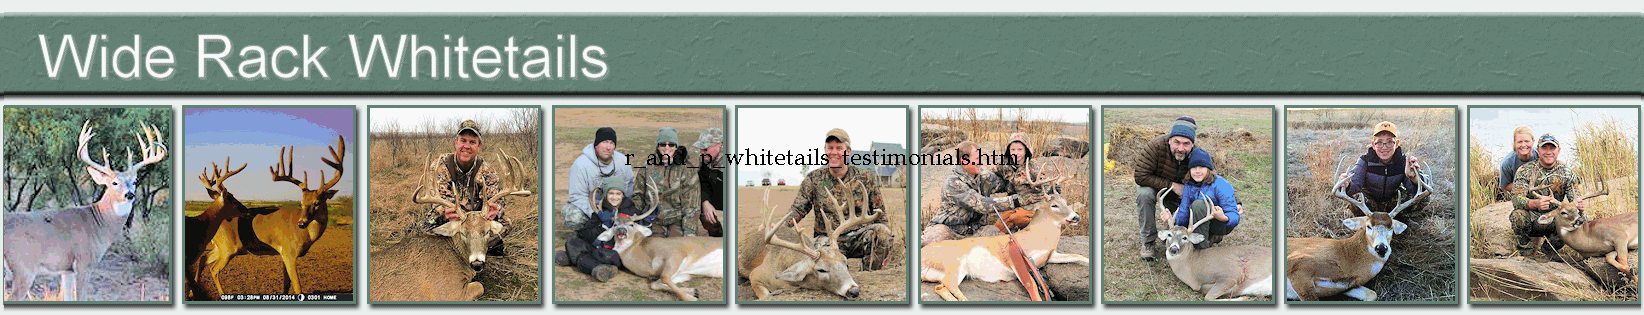 r_and_p_whitetails_testimonials.htm